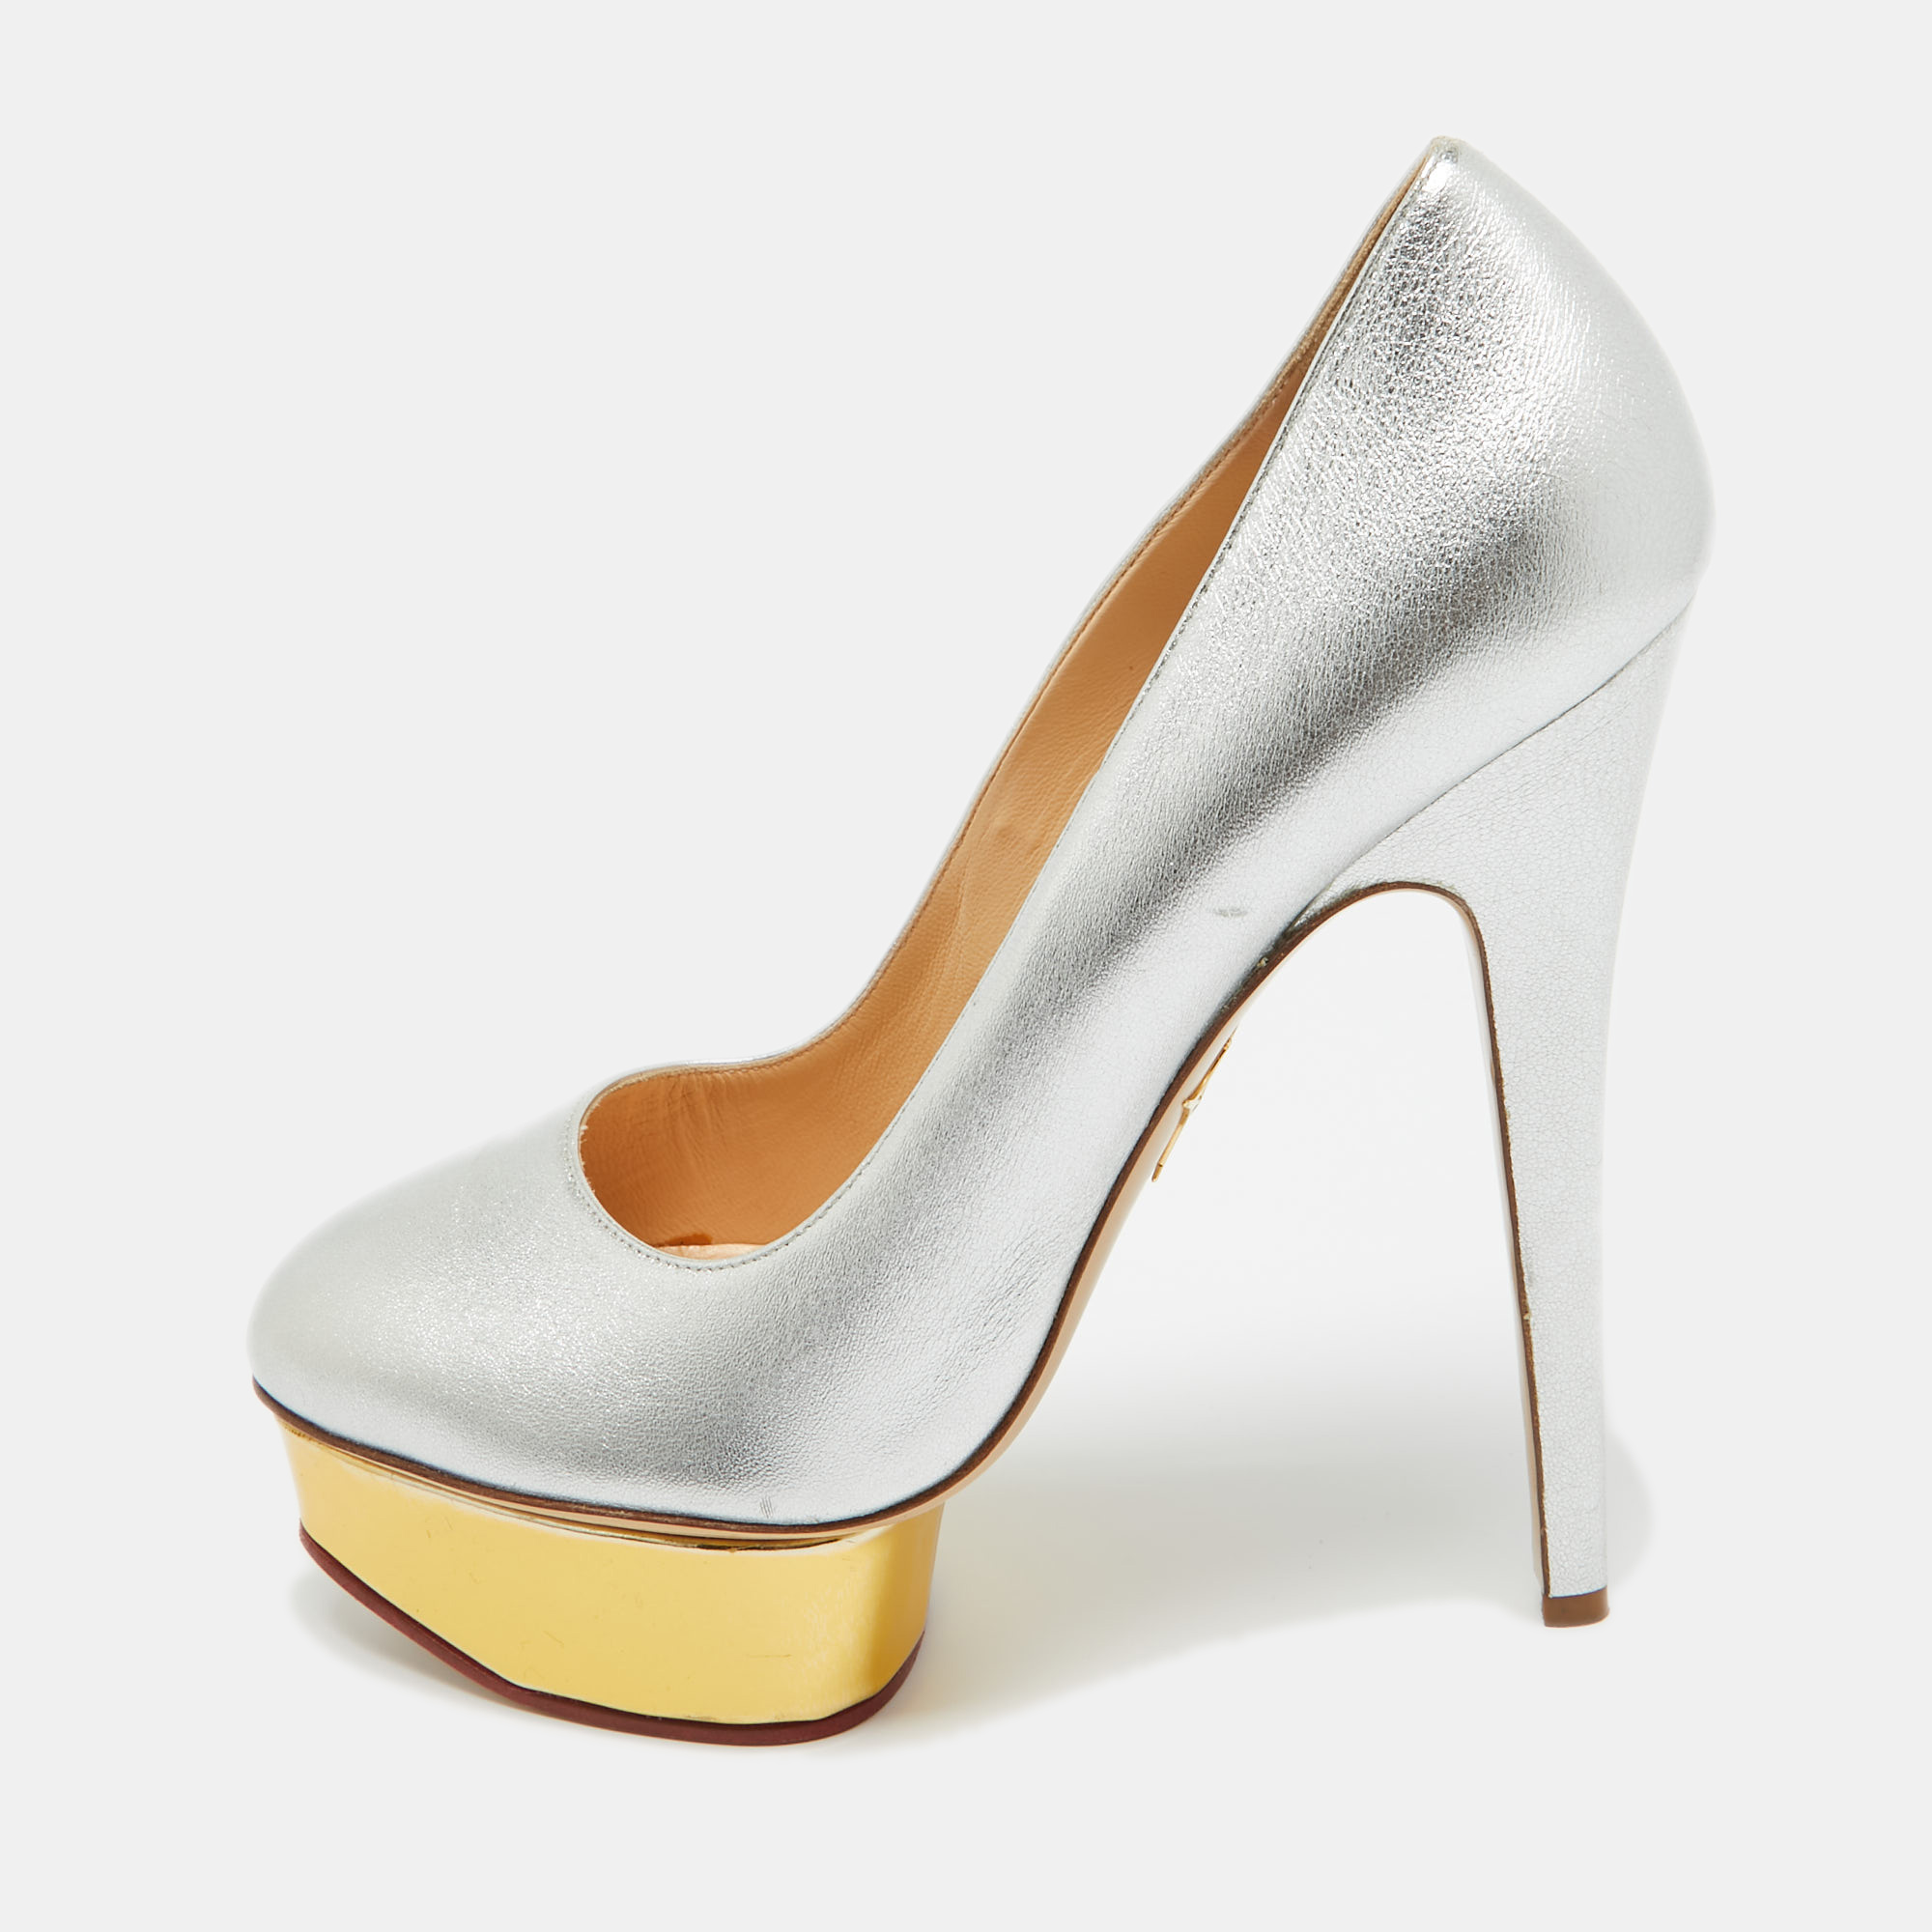 Charlotte olympia silver leather dolly  platform pumps size 40